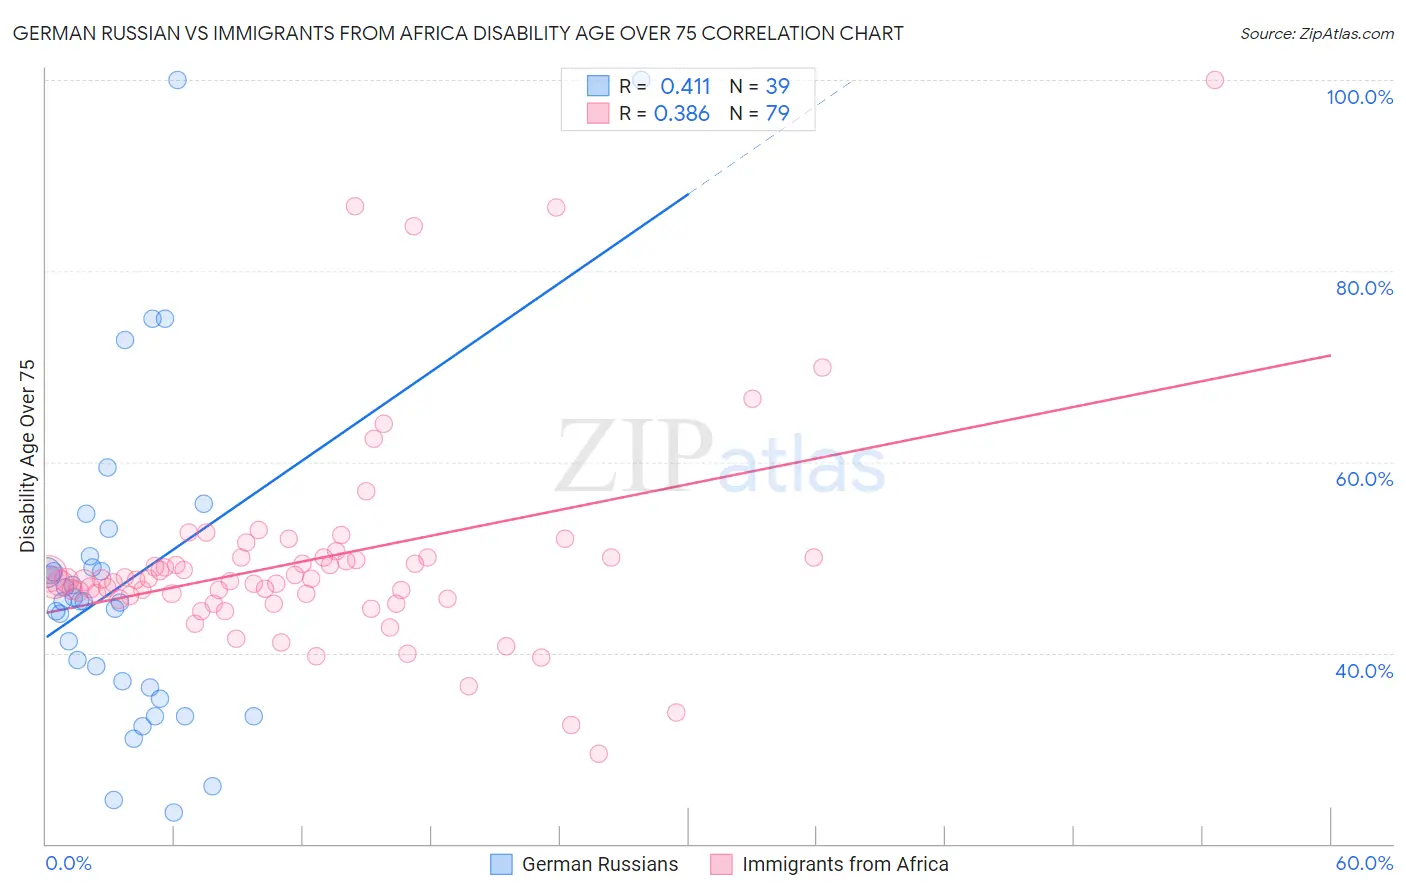 German Russian vs Immigrants from Africa Disability Age Over 75